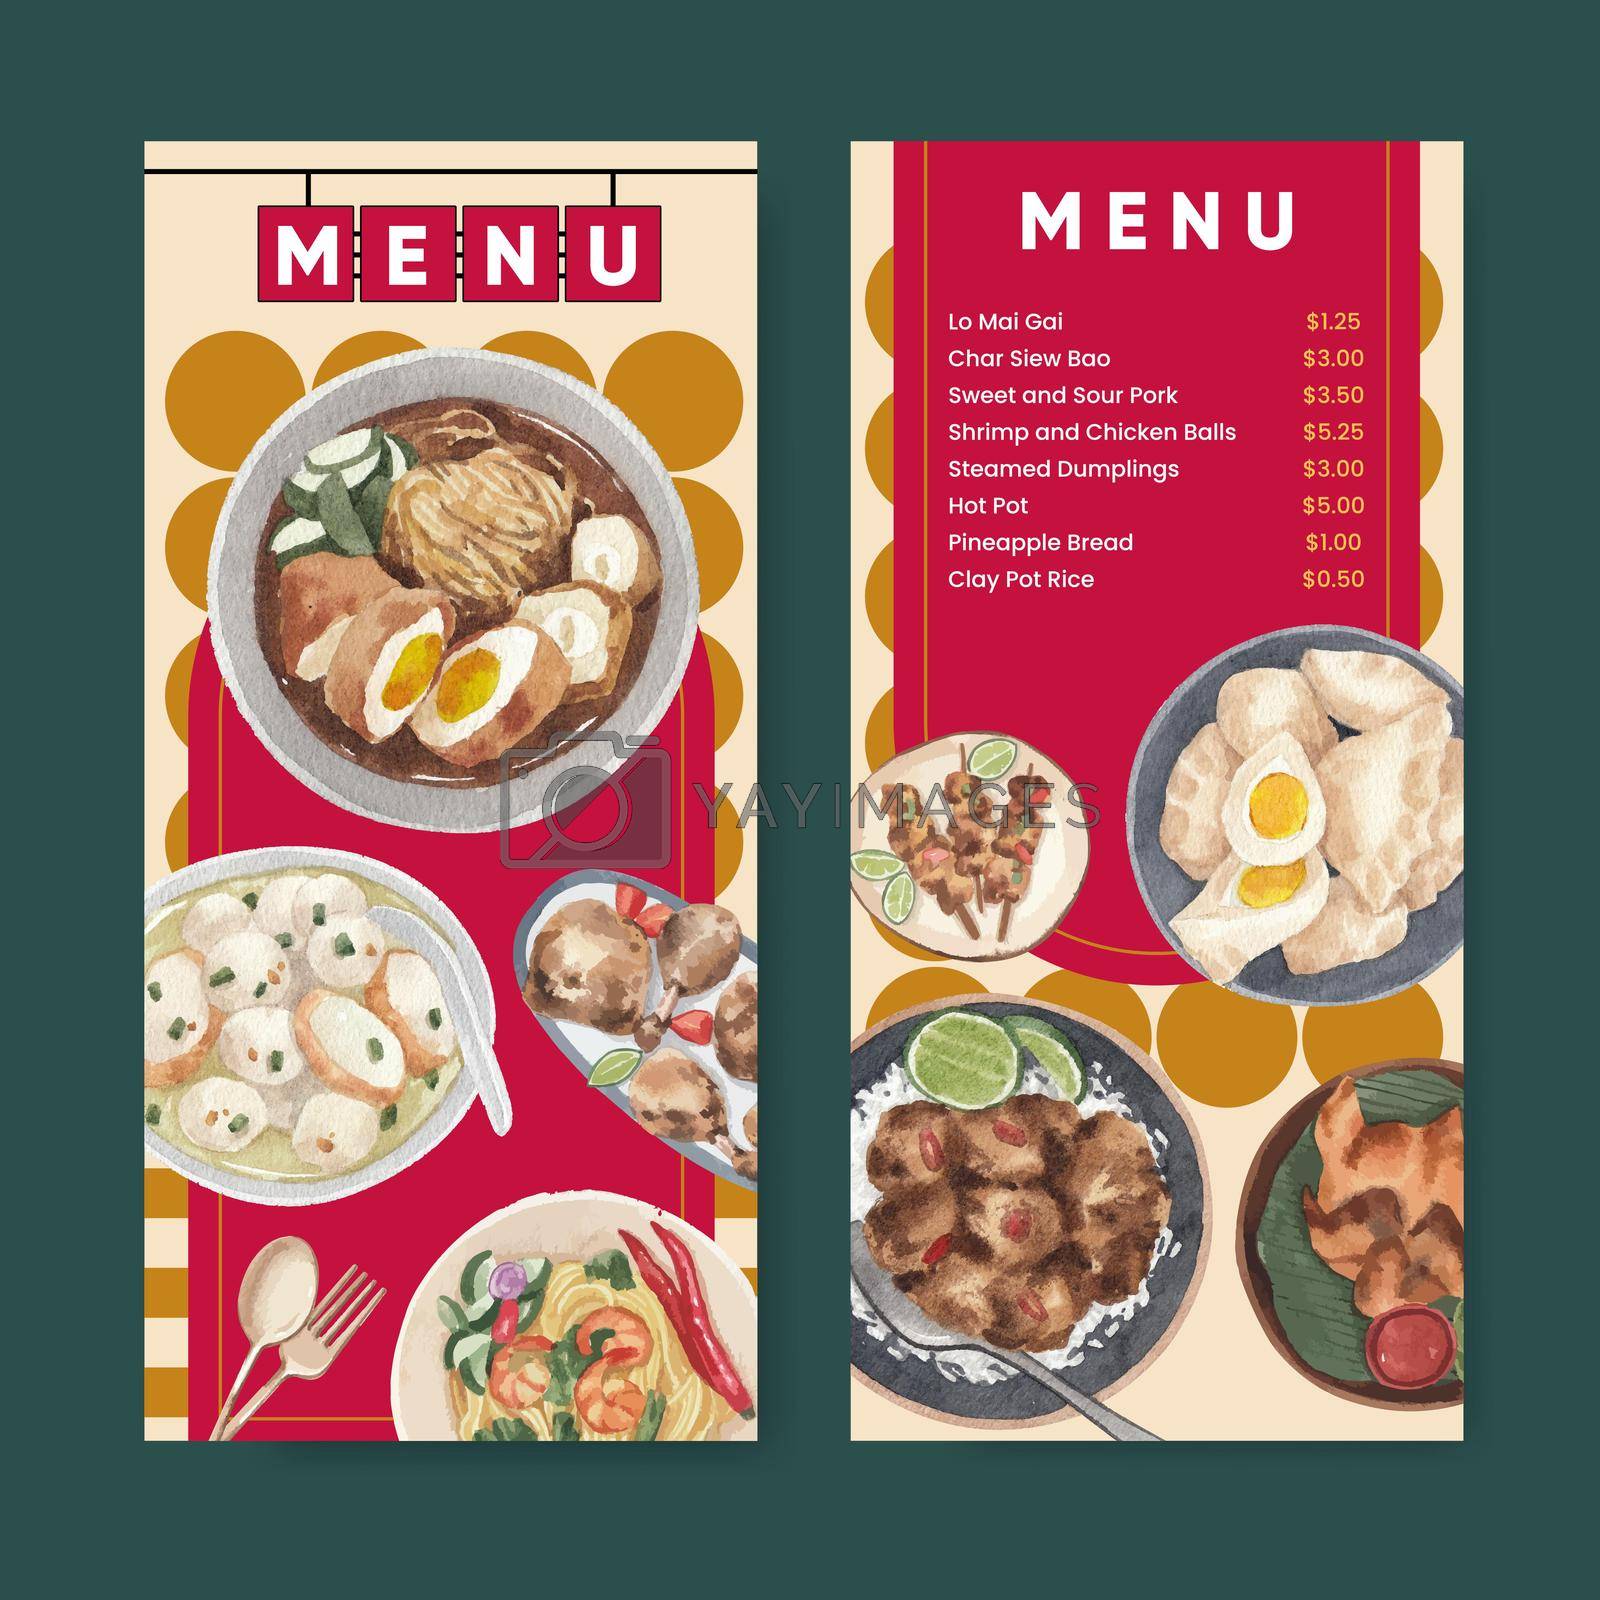 Flyer template with Hong Kong food concept,watercolor style
